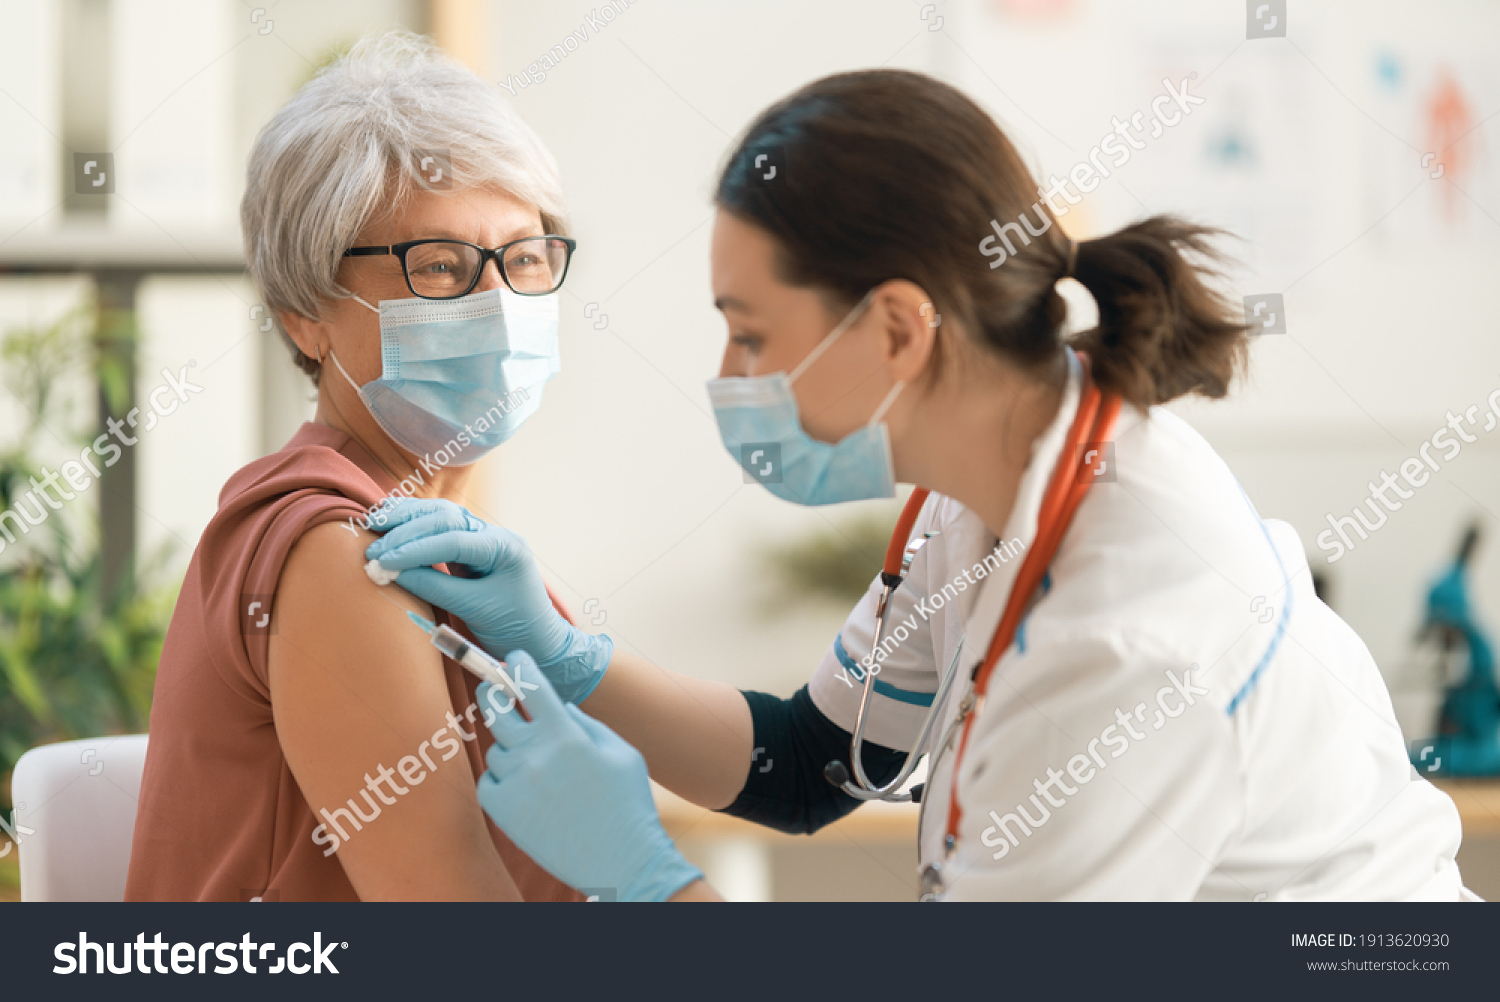 Doctor vaccinating a senior woman. Virus protection. COVID-2019. #1913620930